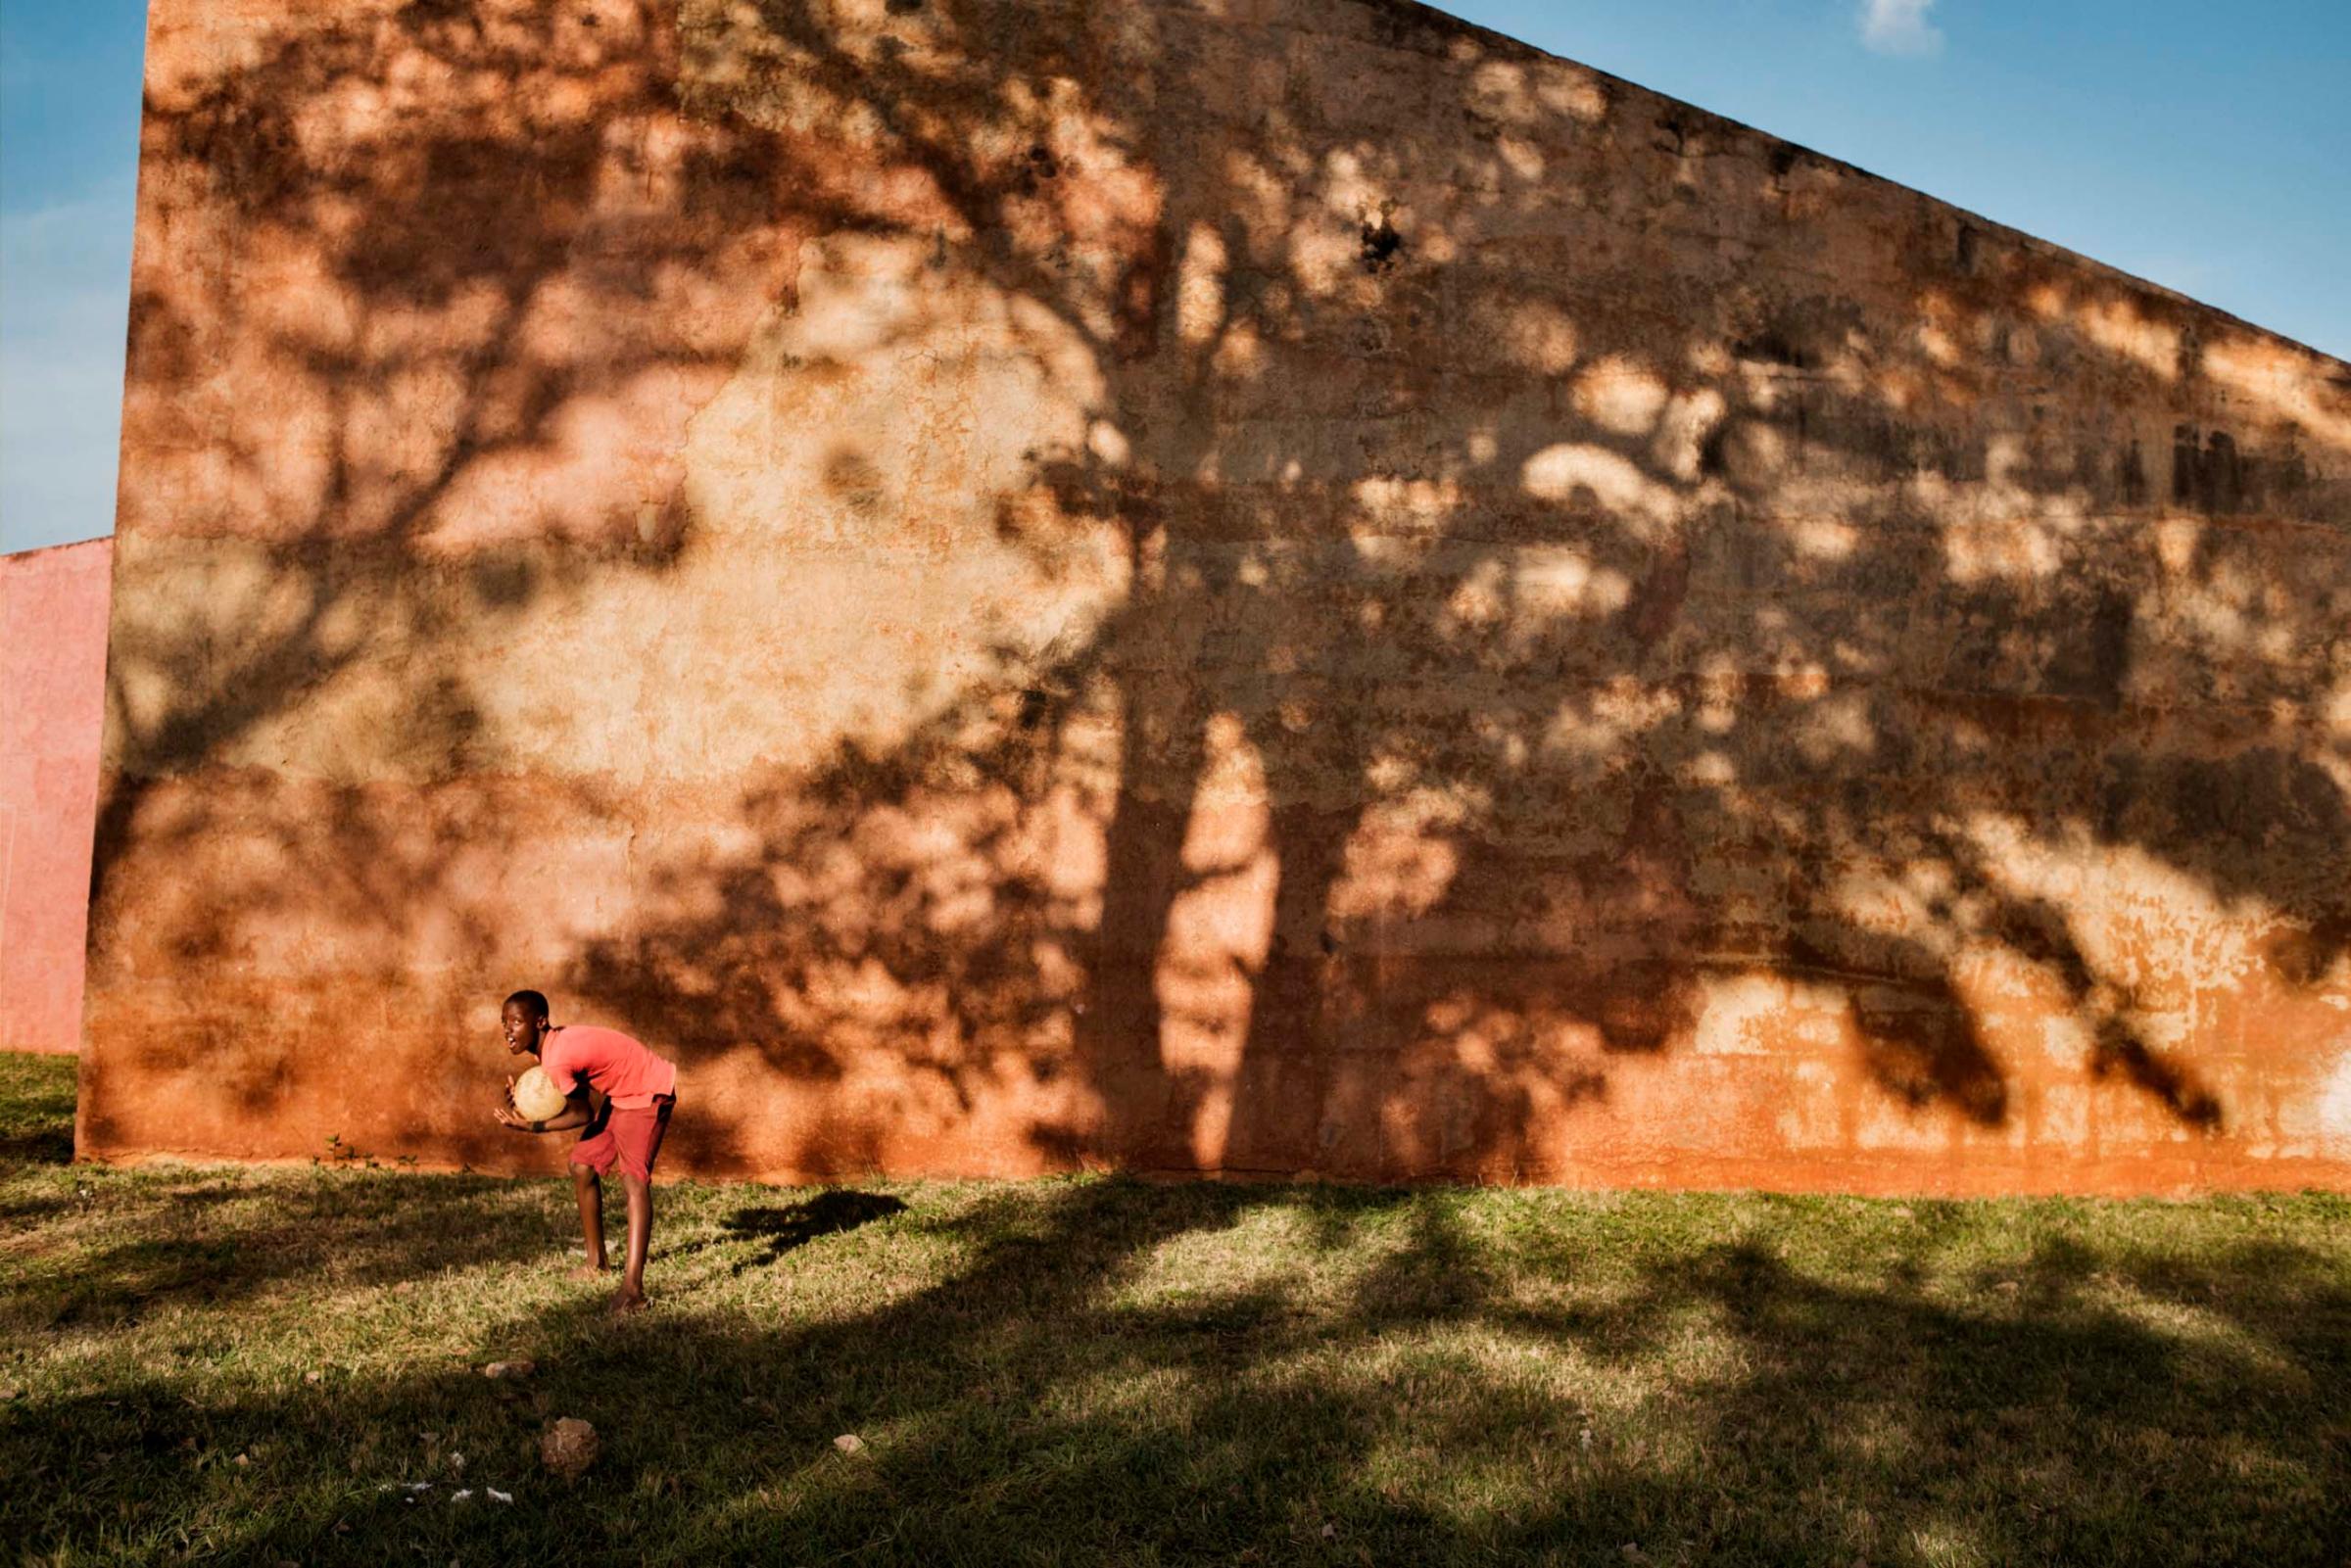 January 2015. A boy plays ball in Mariel, Cuba, the closest port to the United States. In 1980, Fidel Castro allowed 125,000 Cubans to emigrate from Mariel, in what became known as the Mariel boatlift.